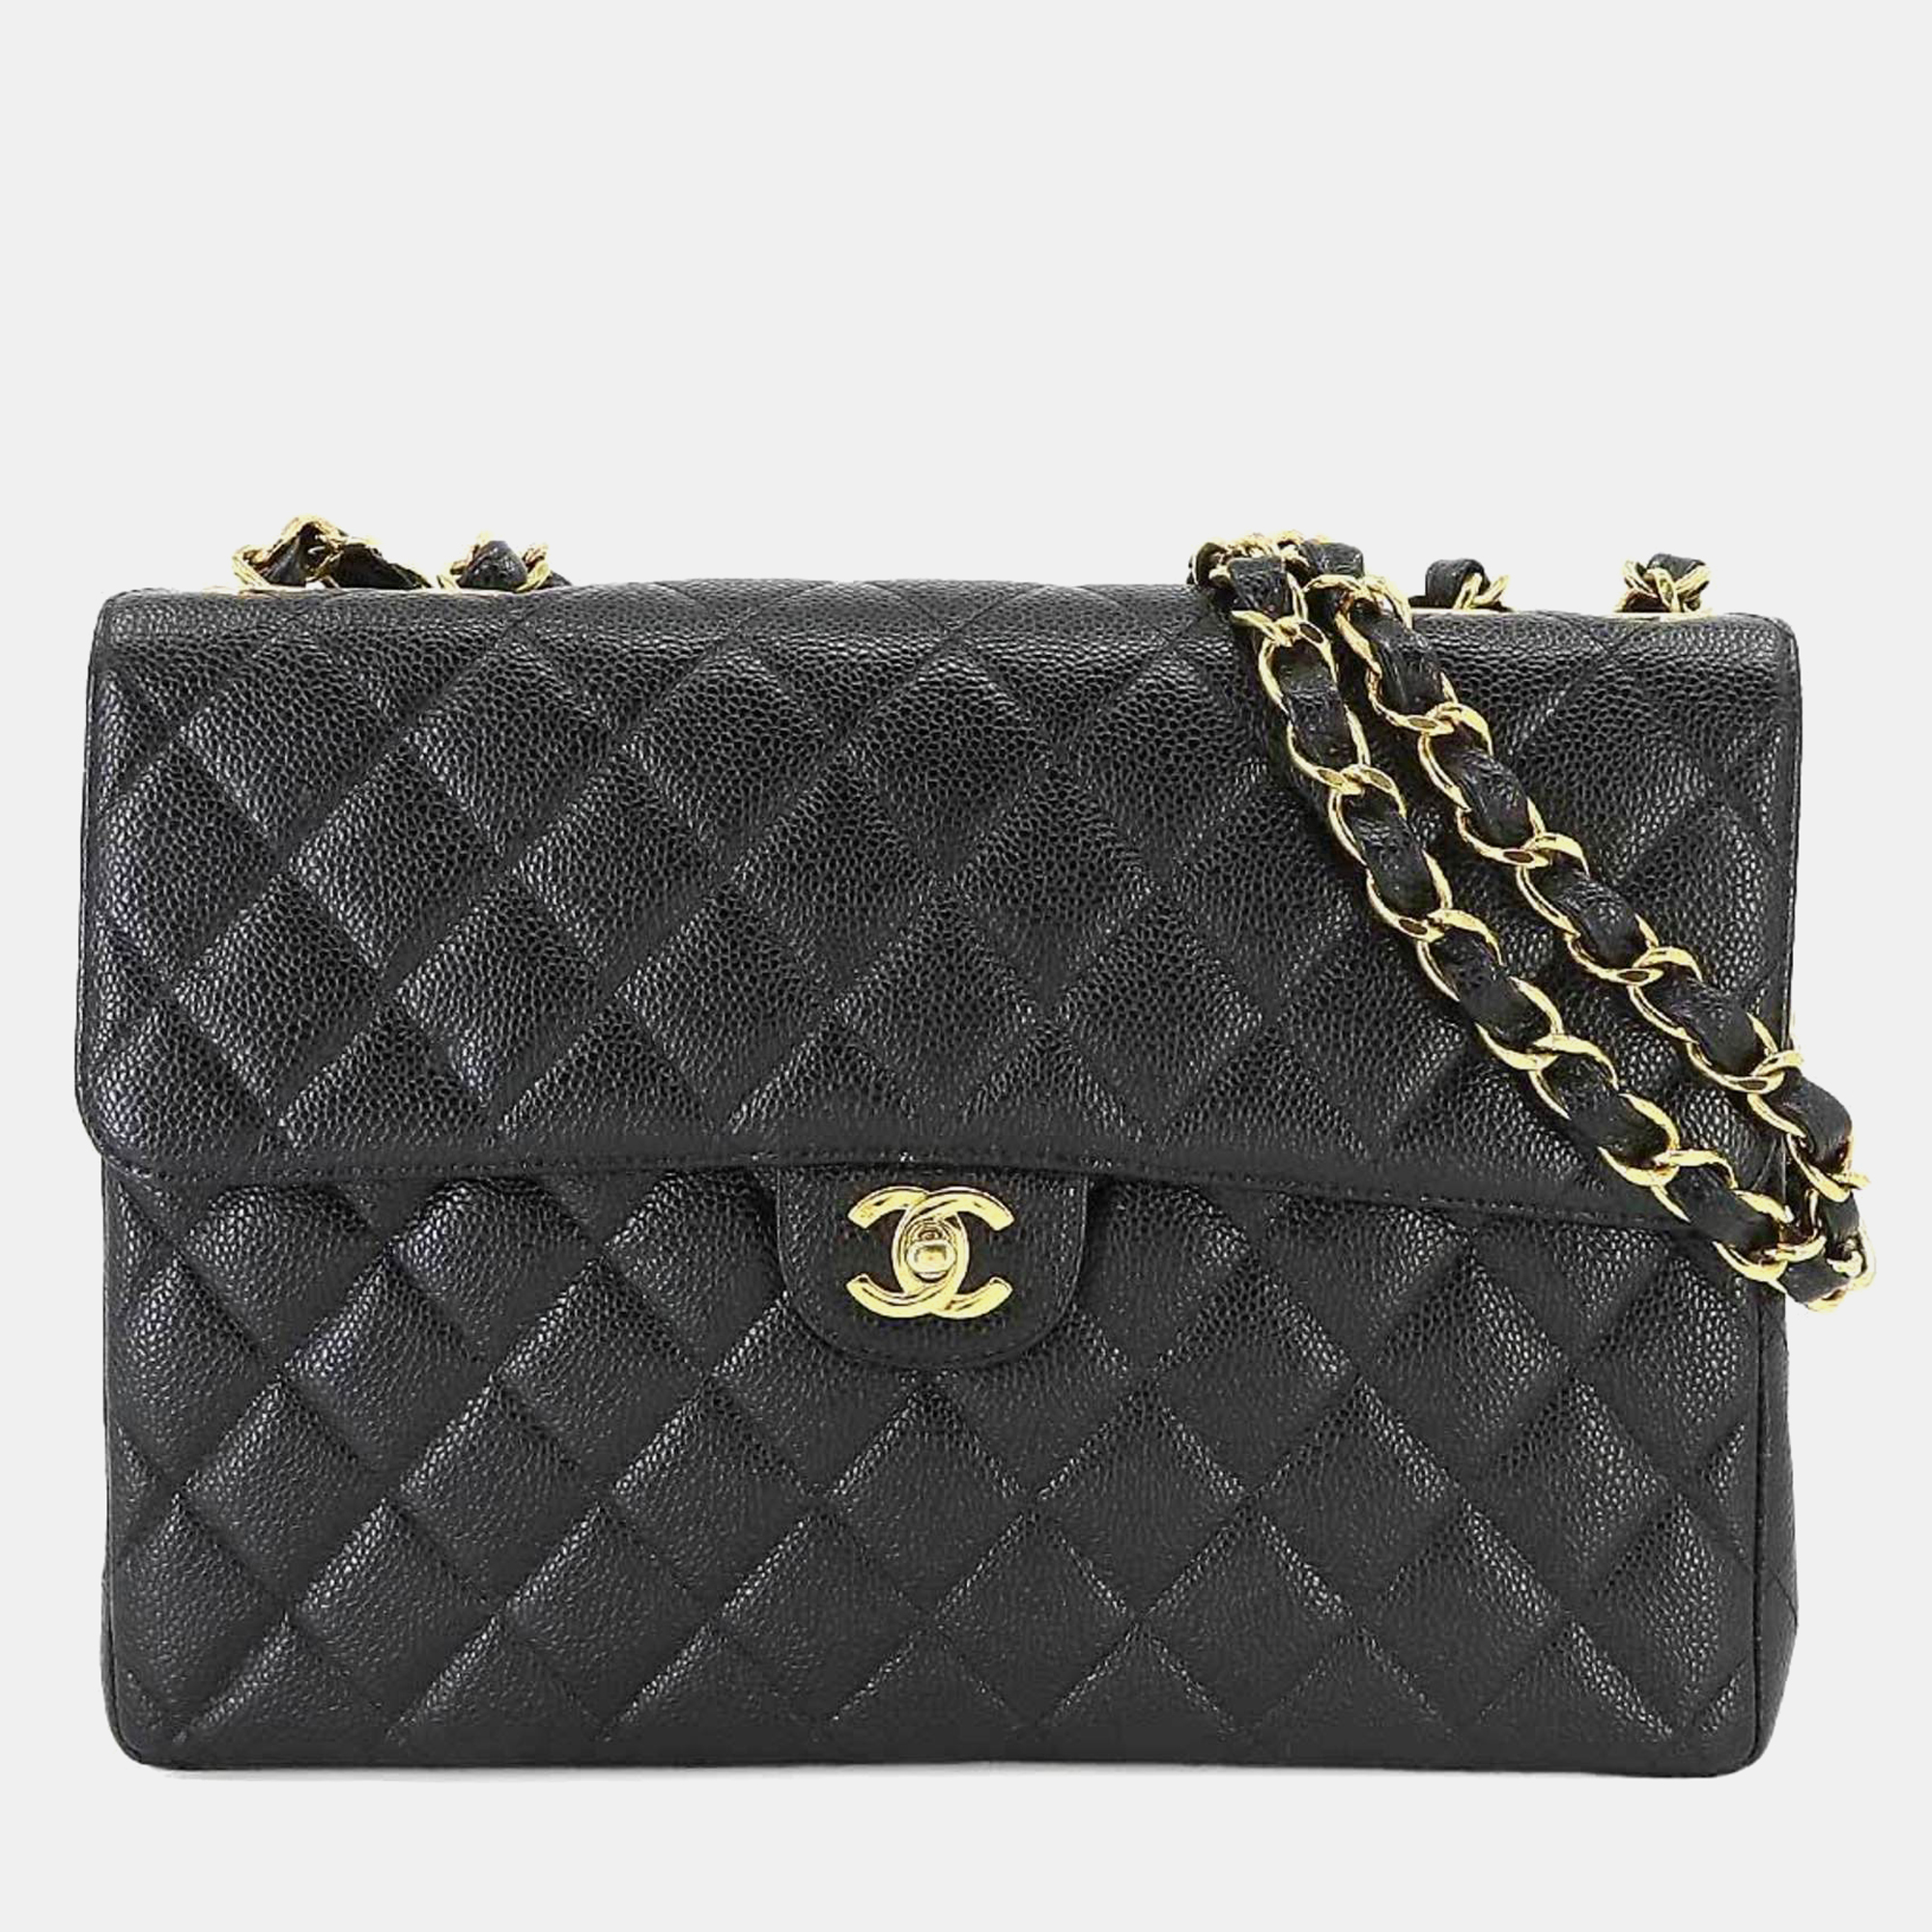 Elevate your style with this Chanel bag. Merging form and function this exquisite accessory epitomizes sophistication ensuring you stand out with elegance and practicality by your side.